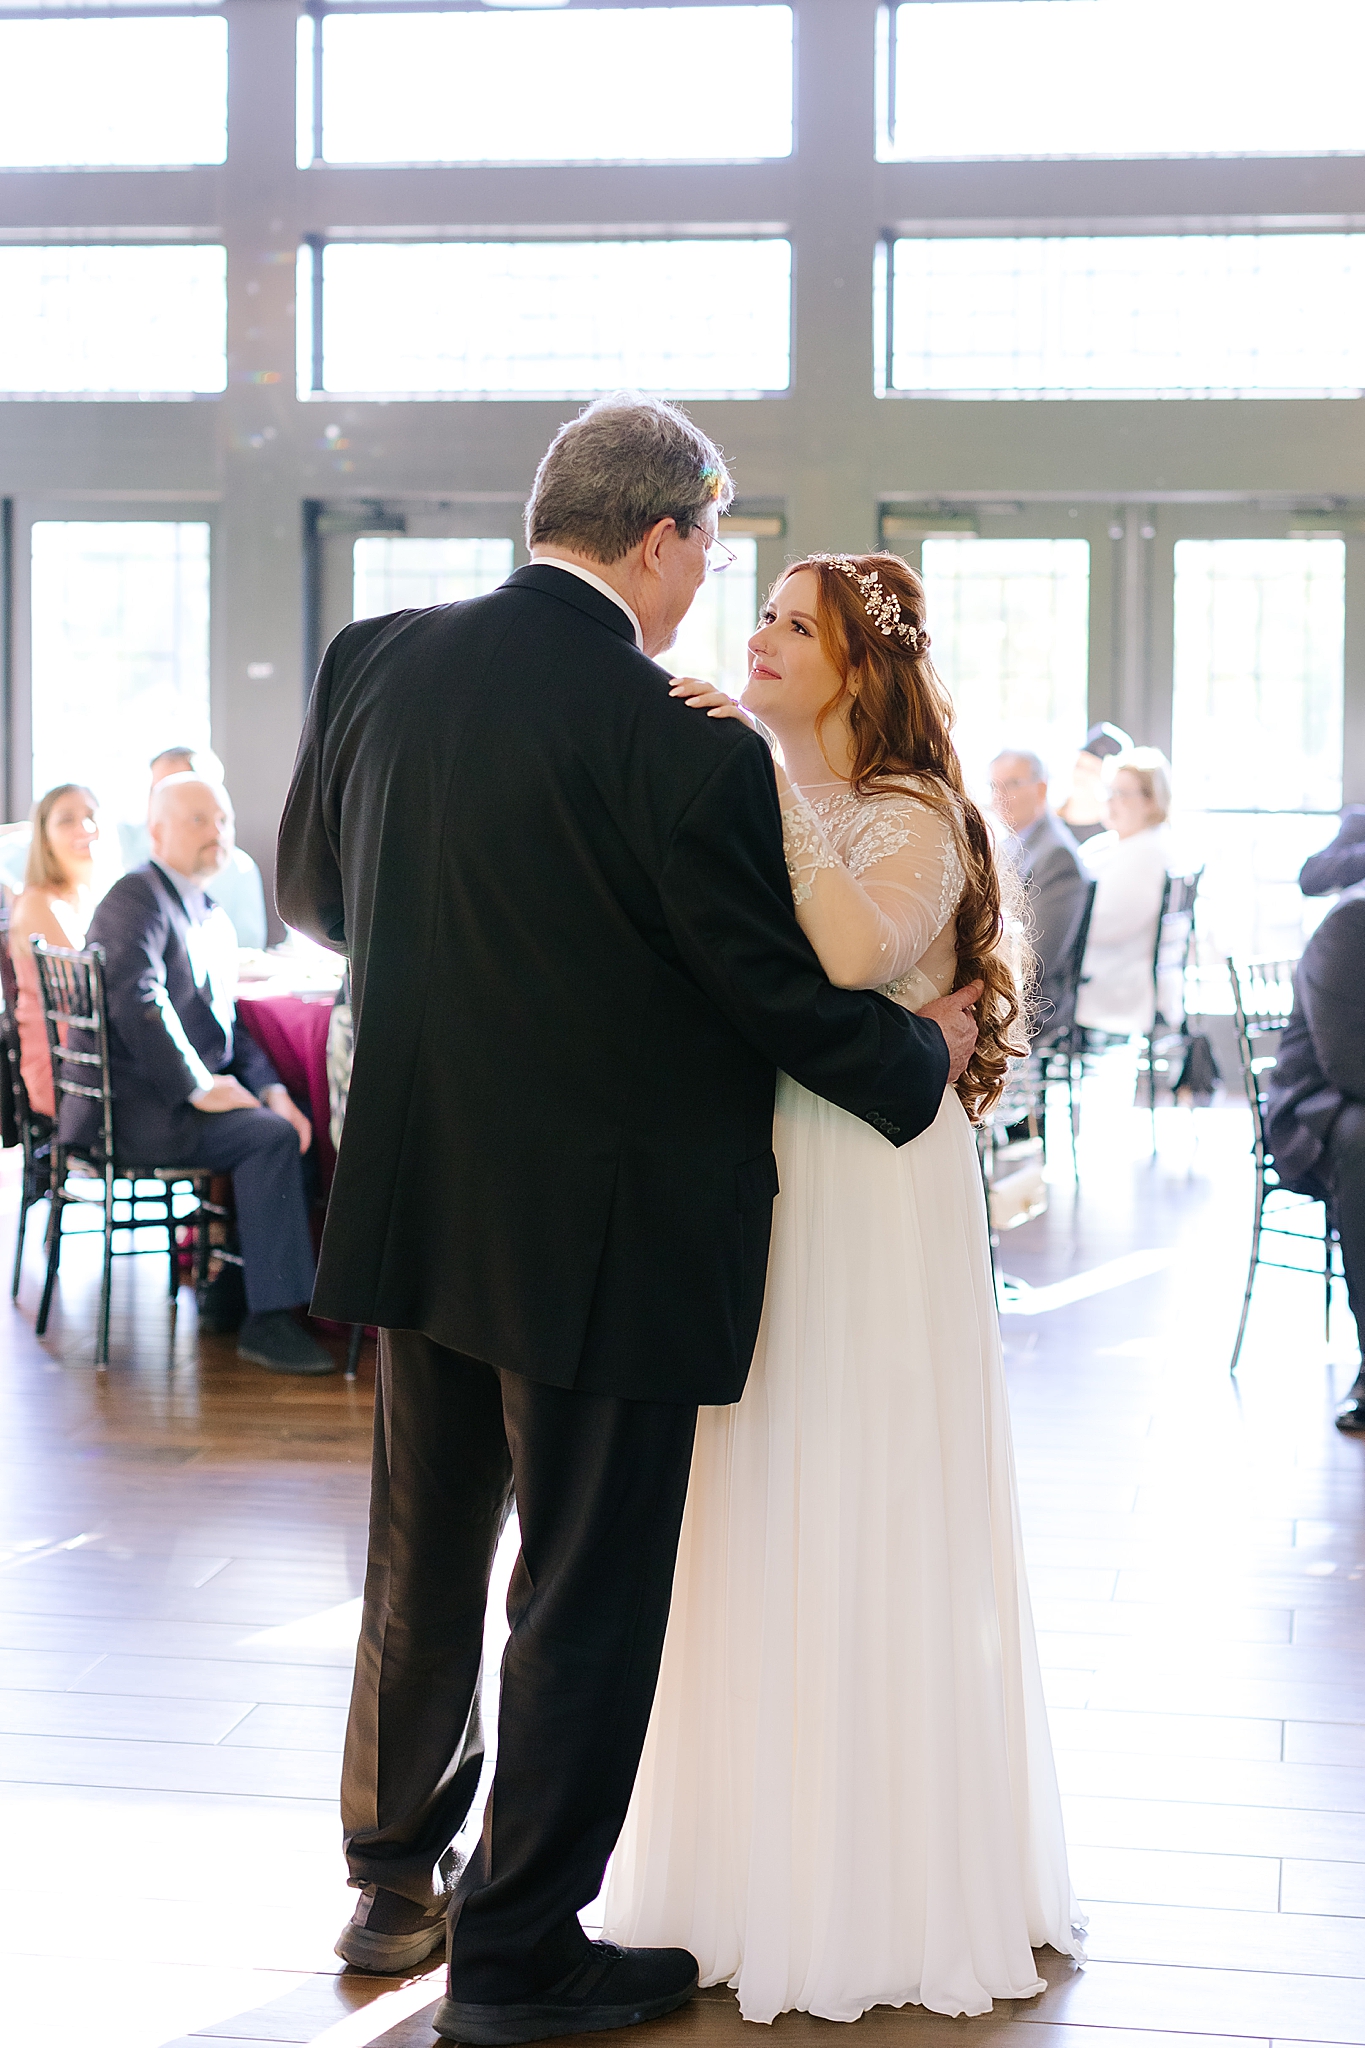 bride dances with dad during wedding reception at Southern Charm Events